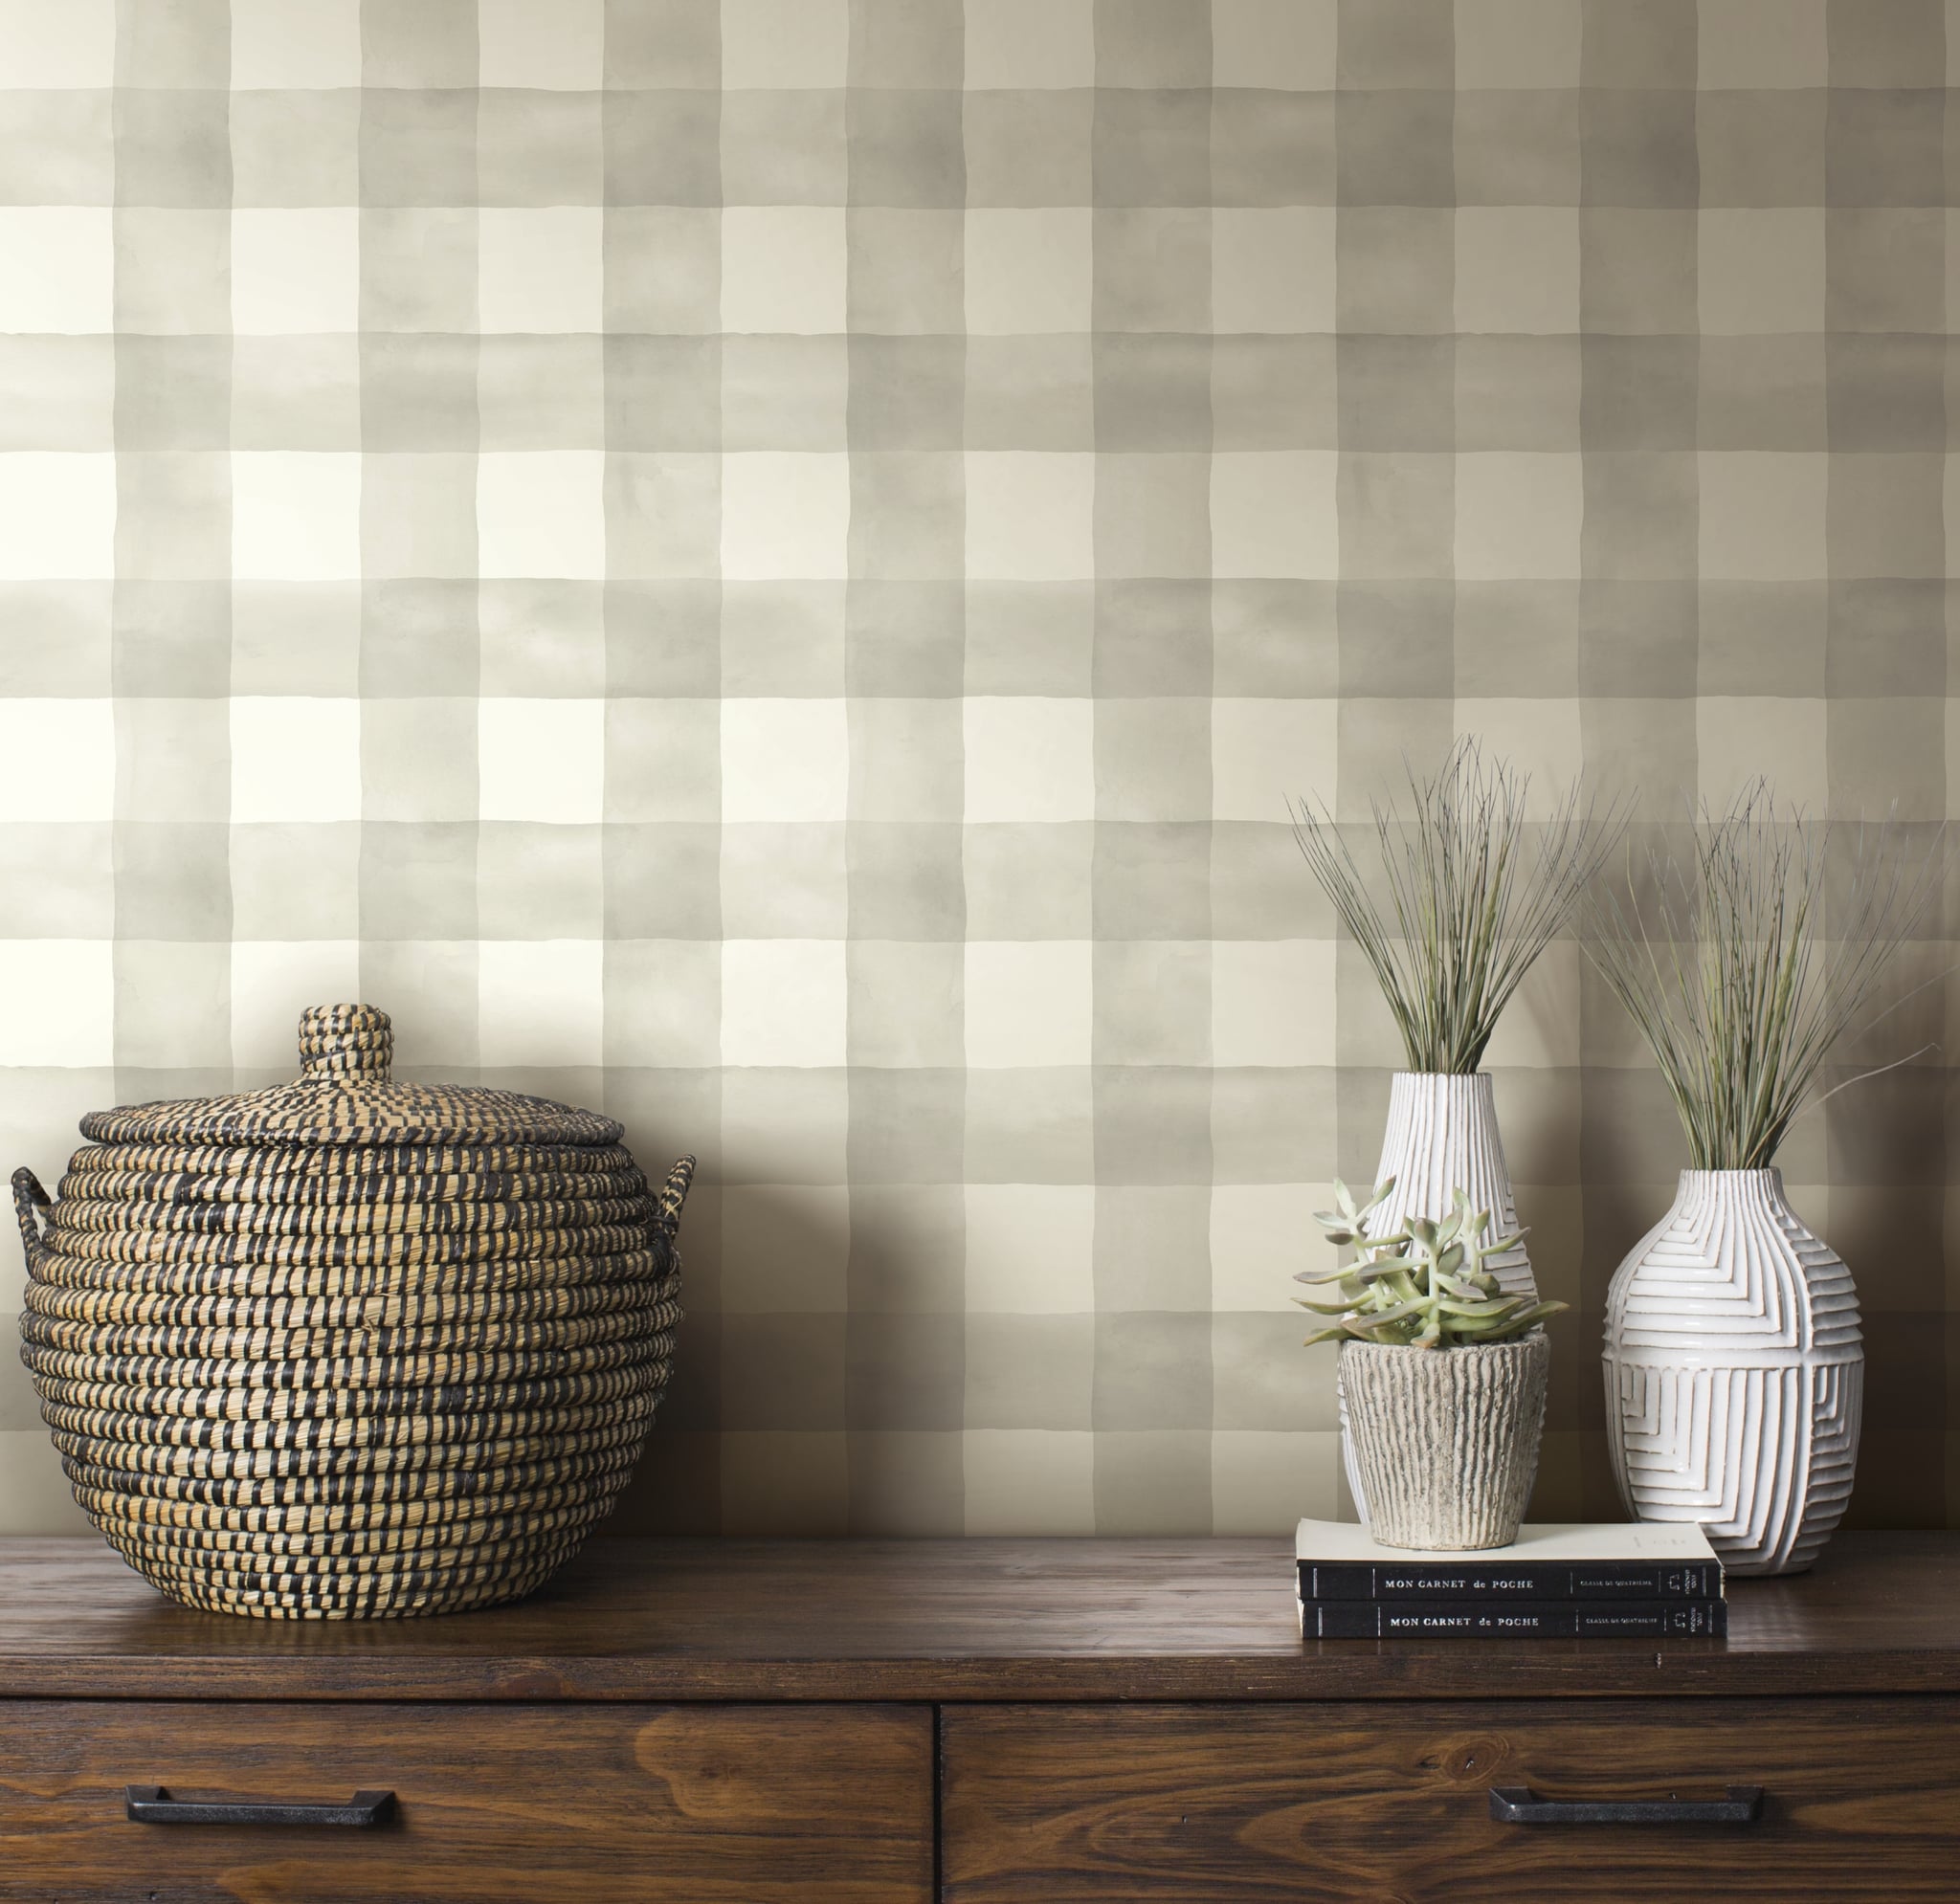 How To Get the Look of Shiplap Walls with Peel and Stick Wallpaper